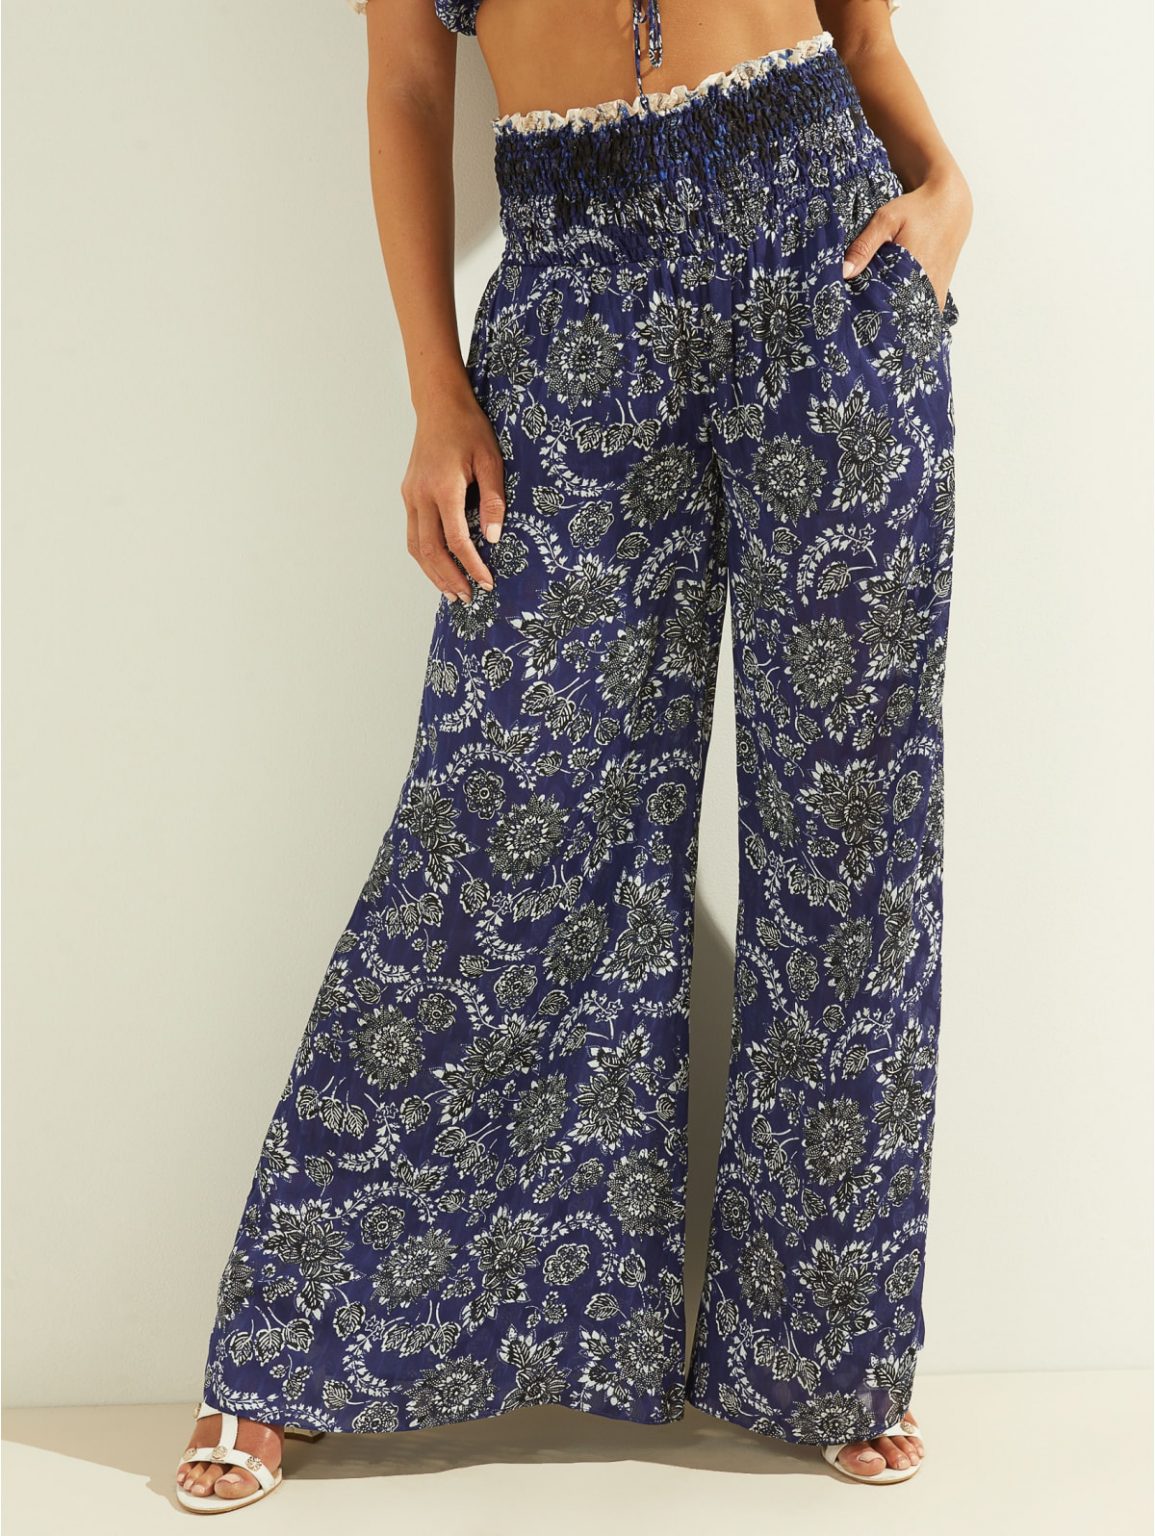 How to Wear Palazzo Pants & 25 Palazzo Pant Outfit Ideas - Her Style Code